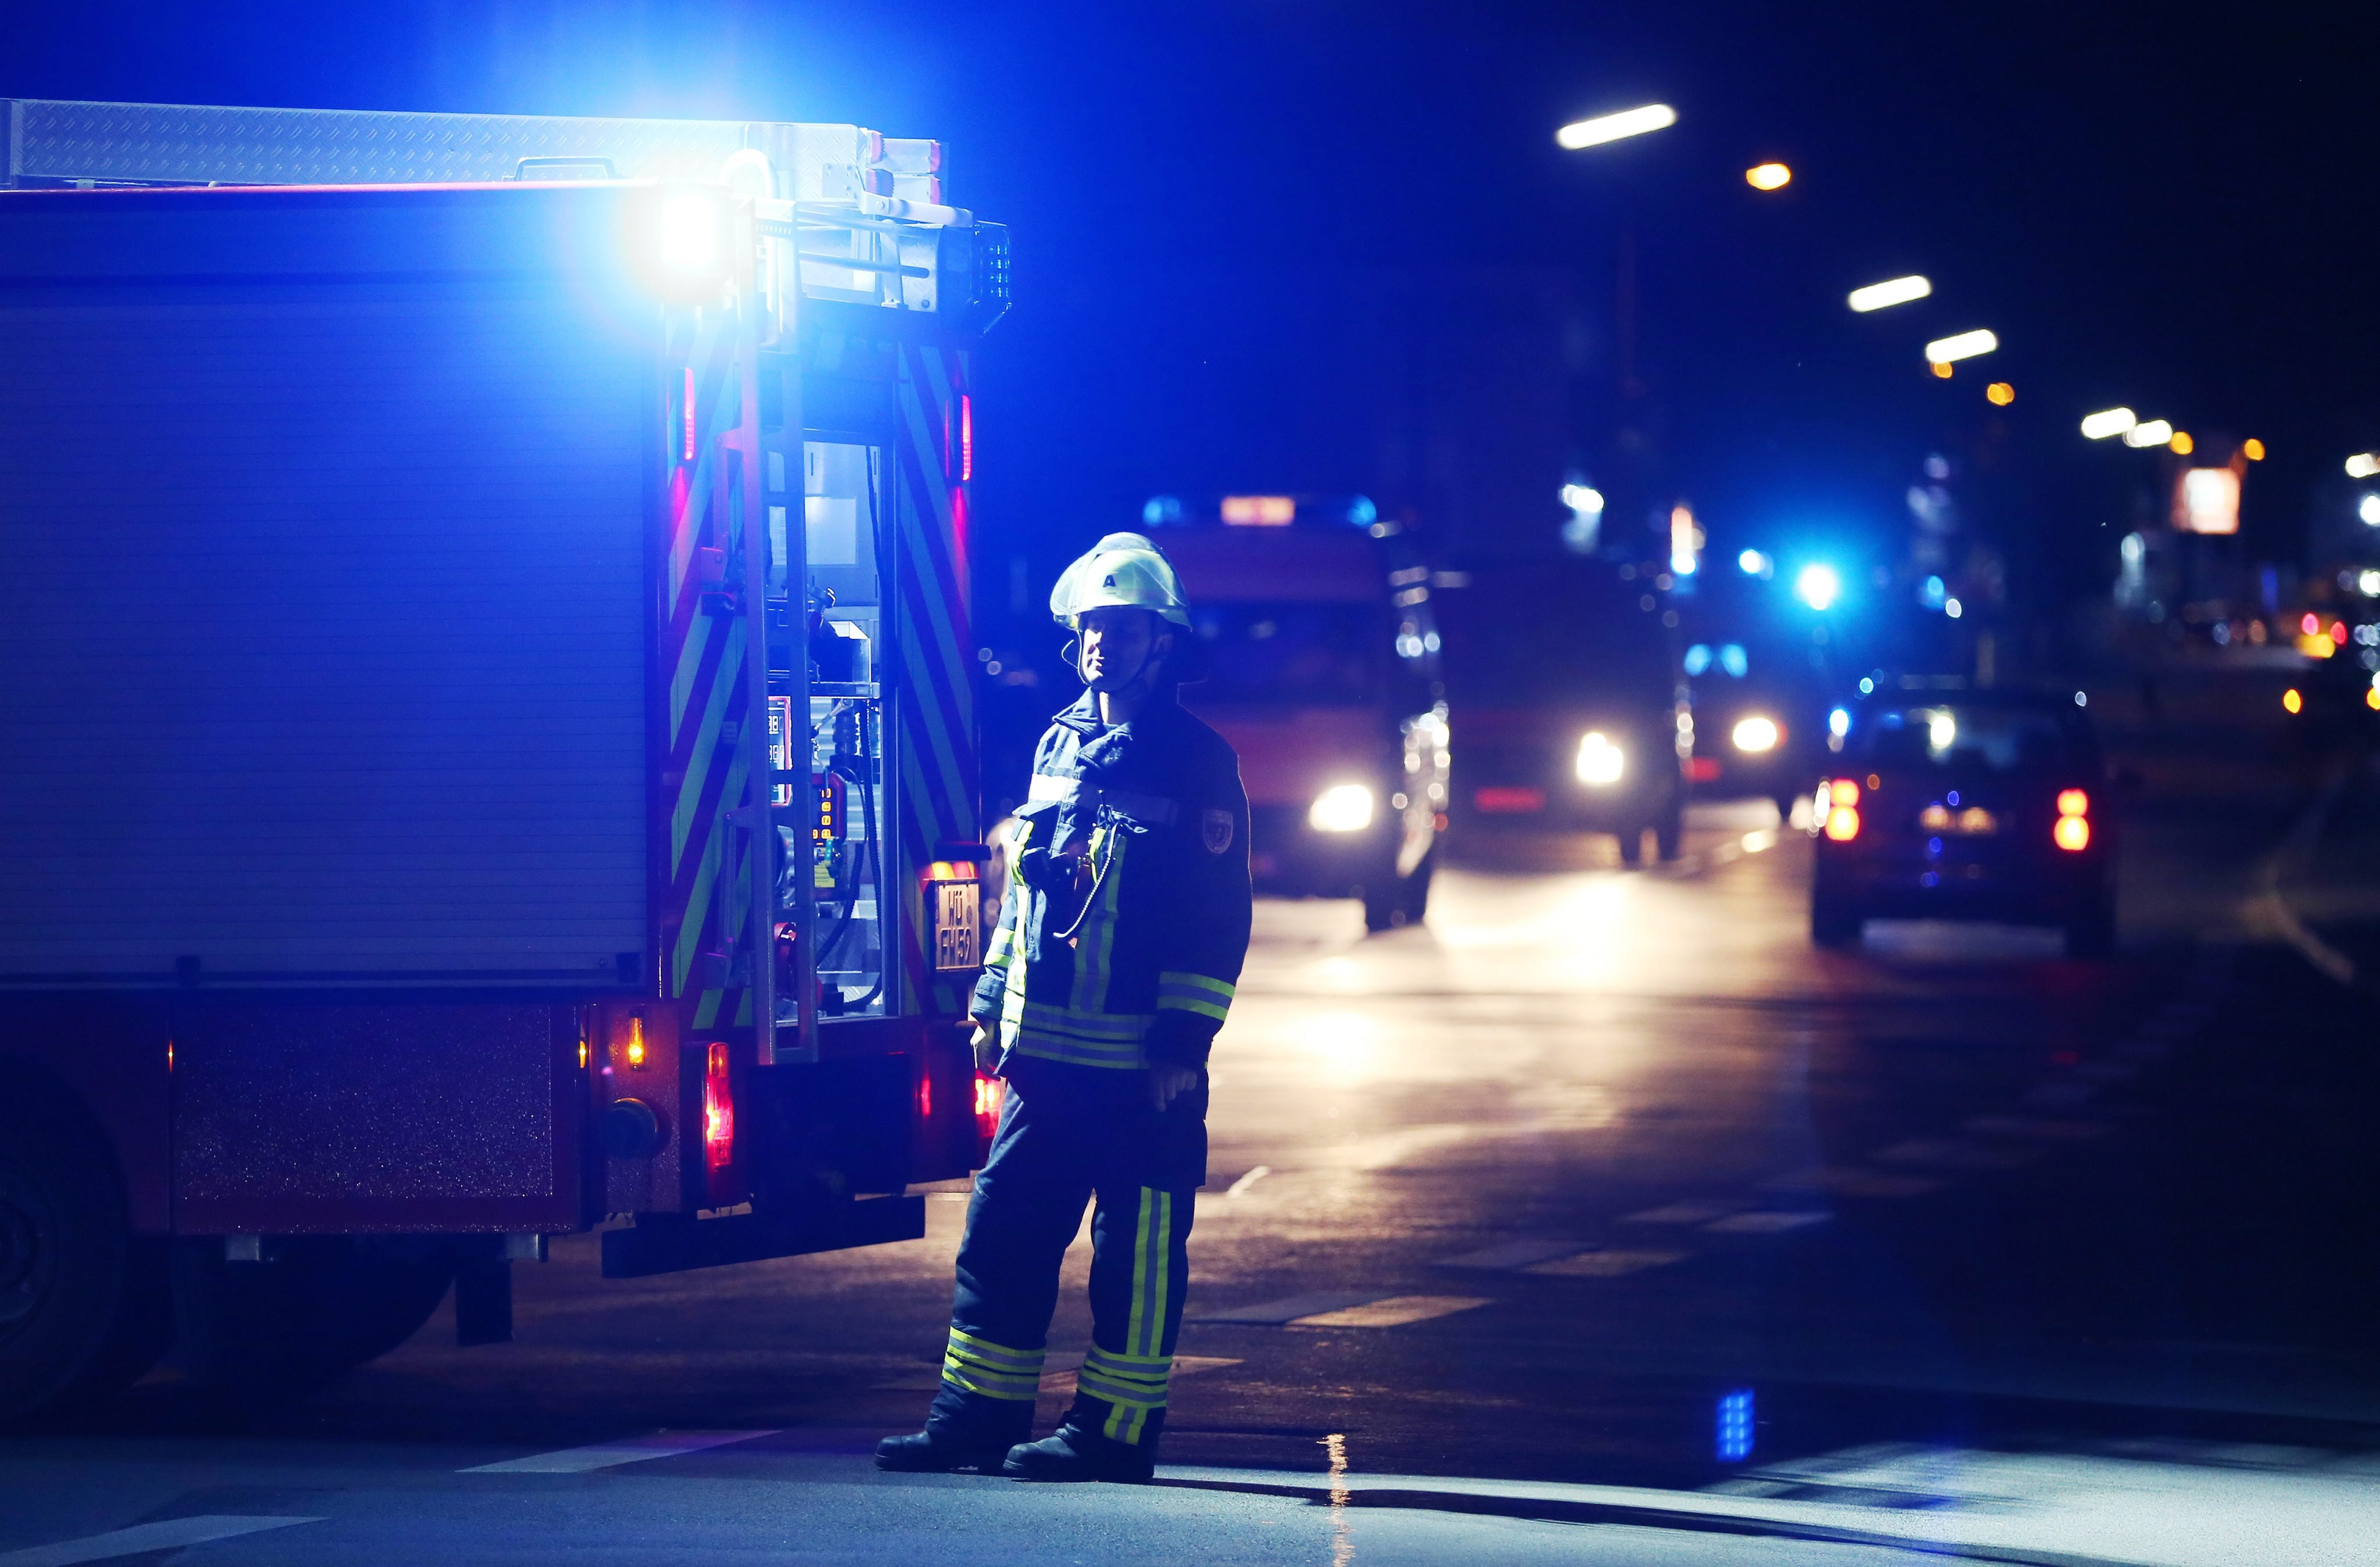 A firefighter stands at a road block in Wuerzburg, Germany, July 18, 2016. Reports state that a man allegedly wielding an axe injured multiple passengers on a regional train in Wuerzburg. (Karl-Josef Hildenbrand—EPA)